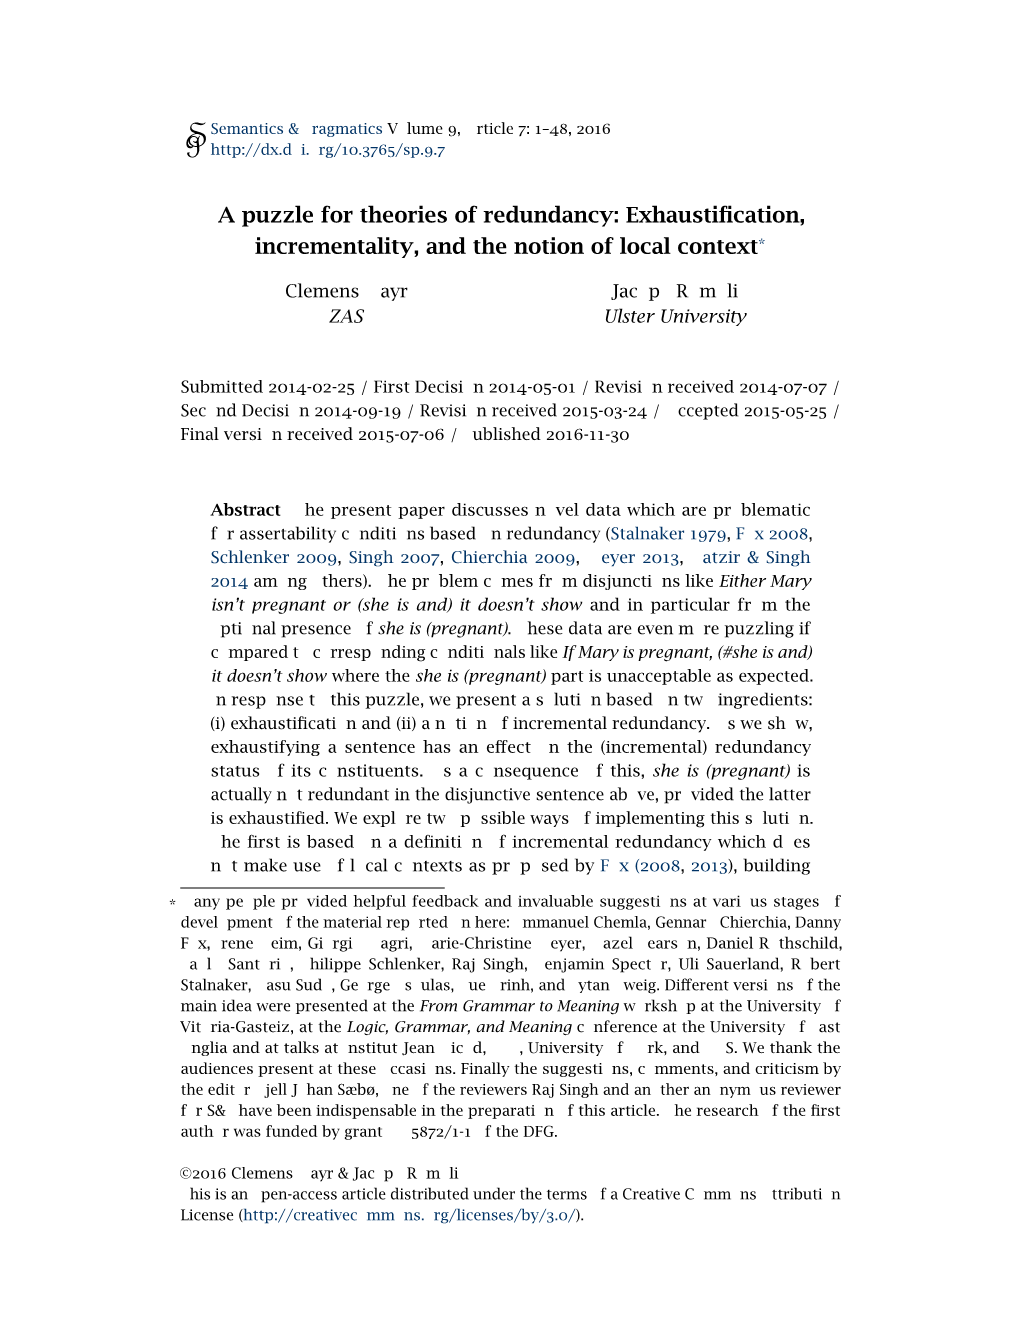 A Puzzle for Theories of Redundancy: Exhaustification, Incrementality, And